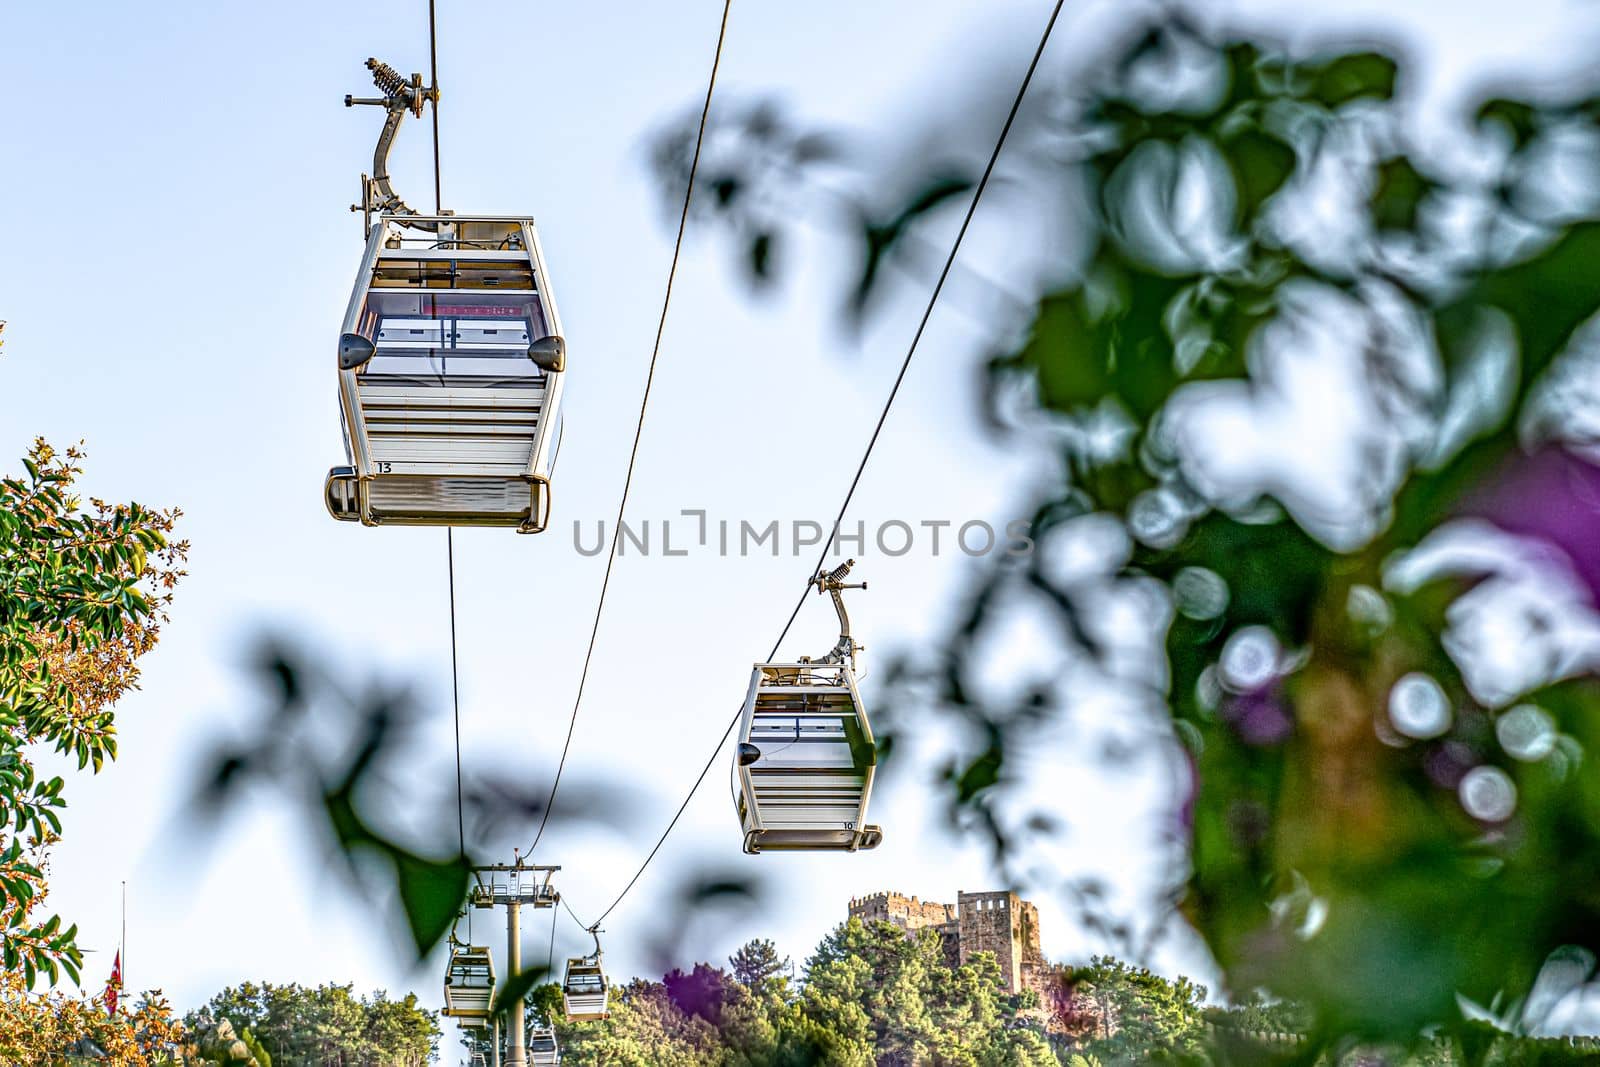 Cableway cabins on background of sky, flowers, and plants by Laguna781